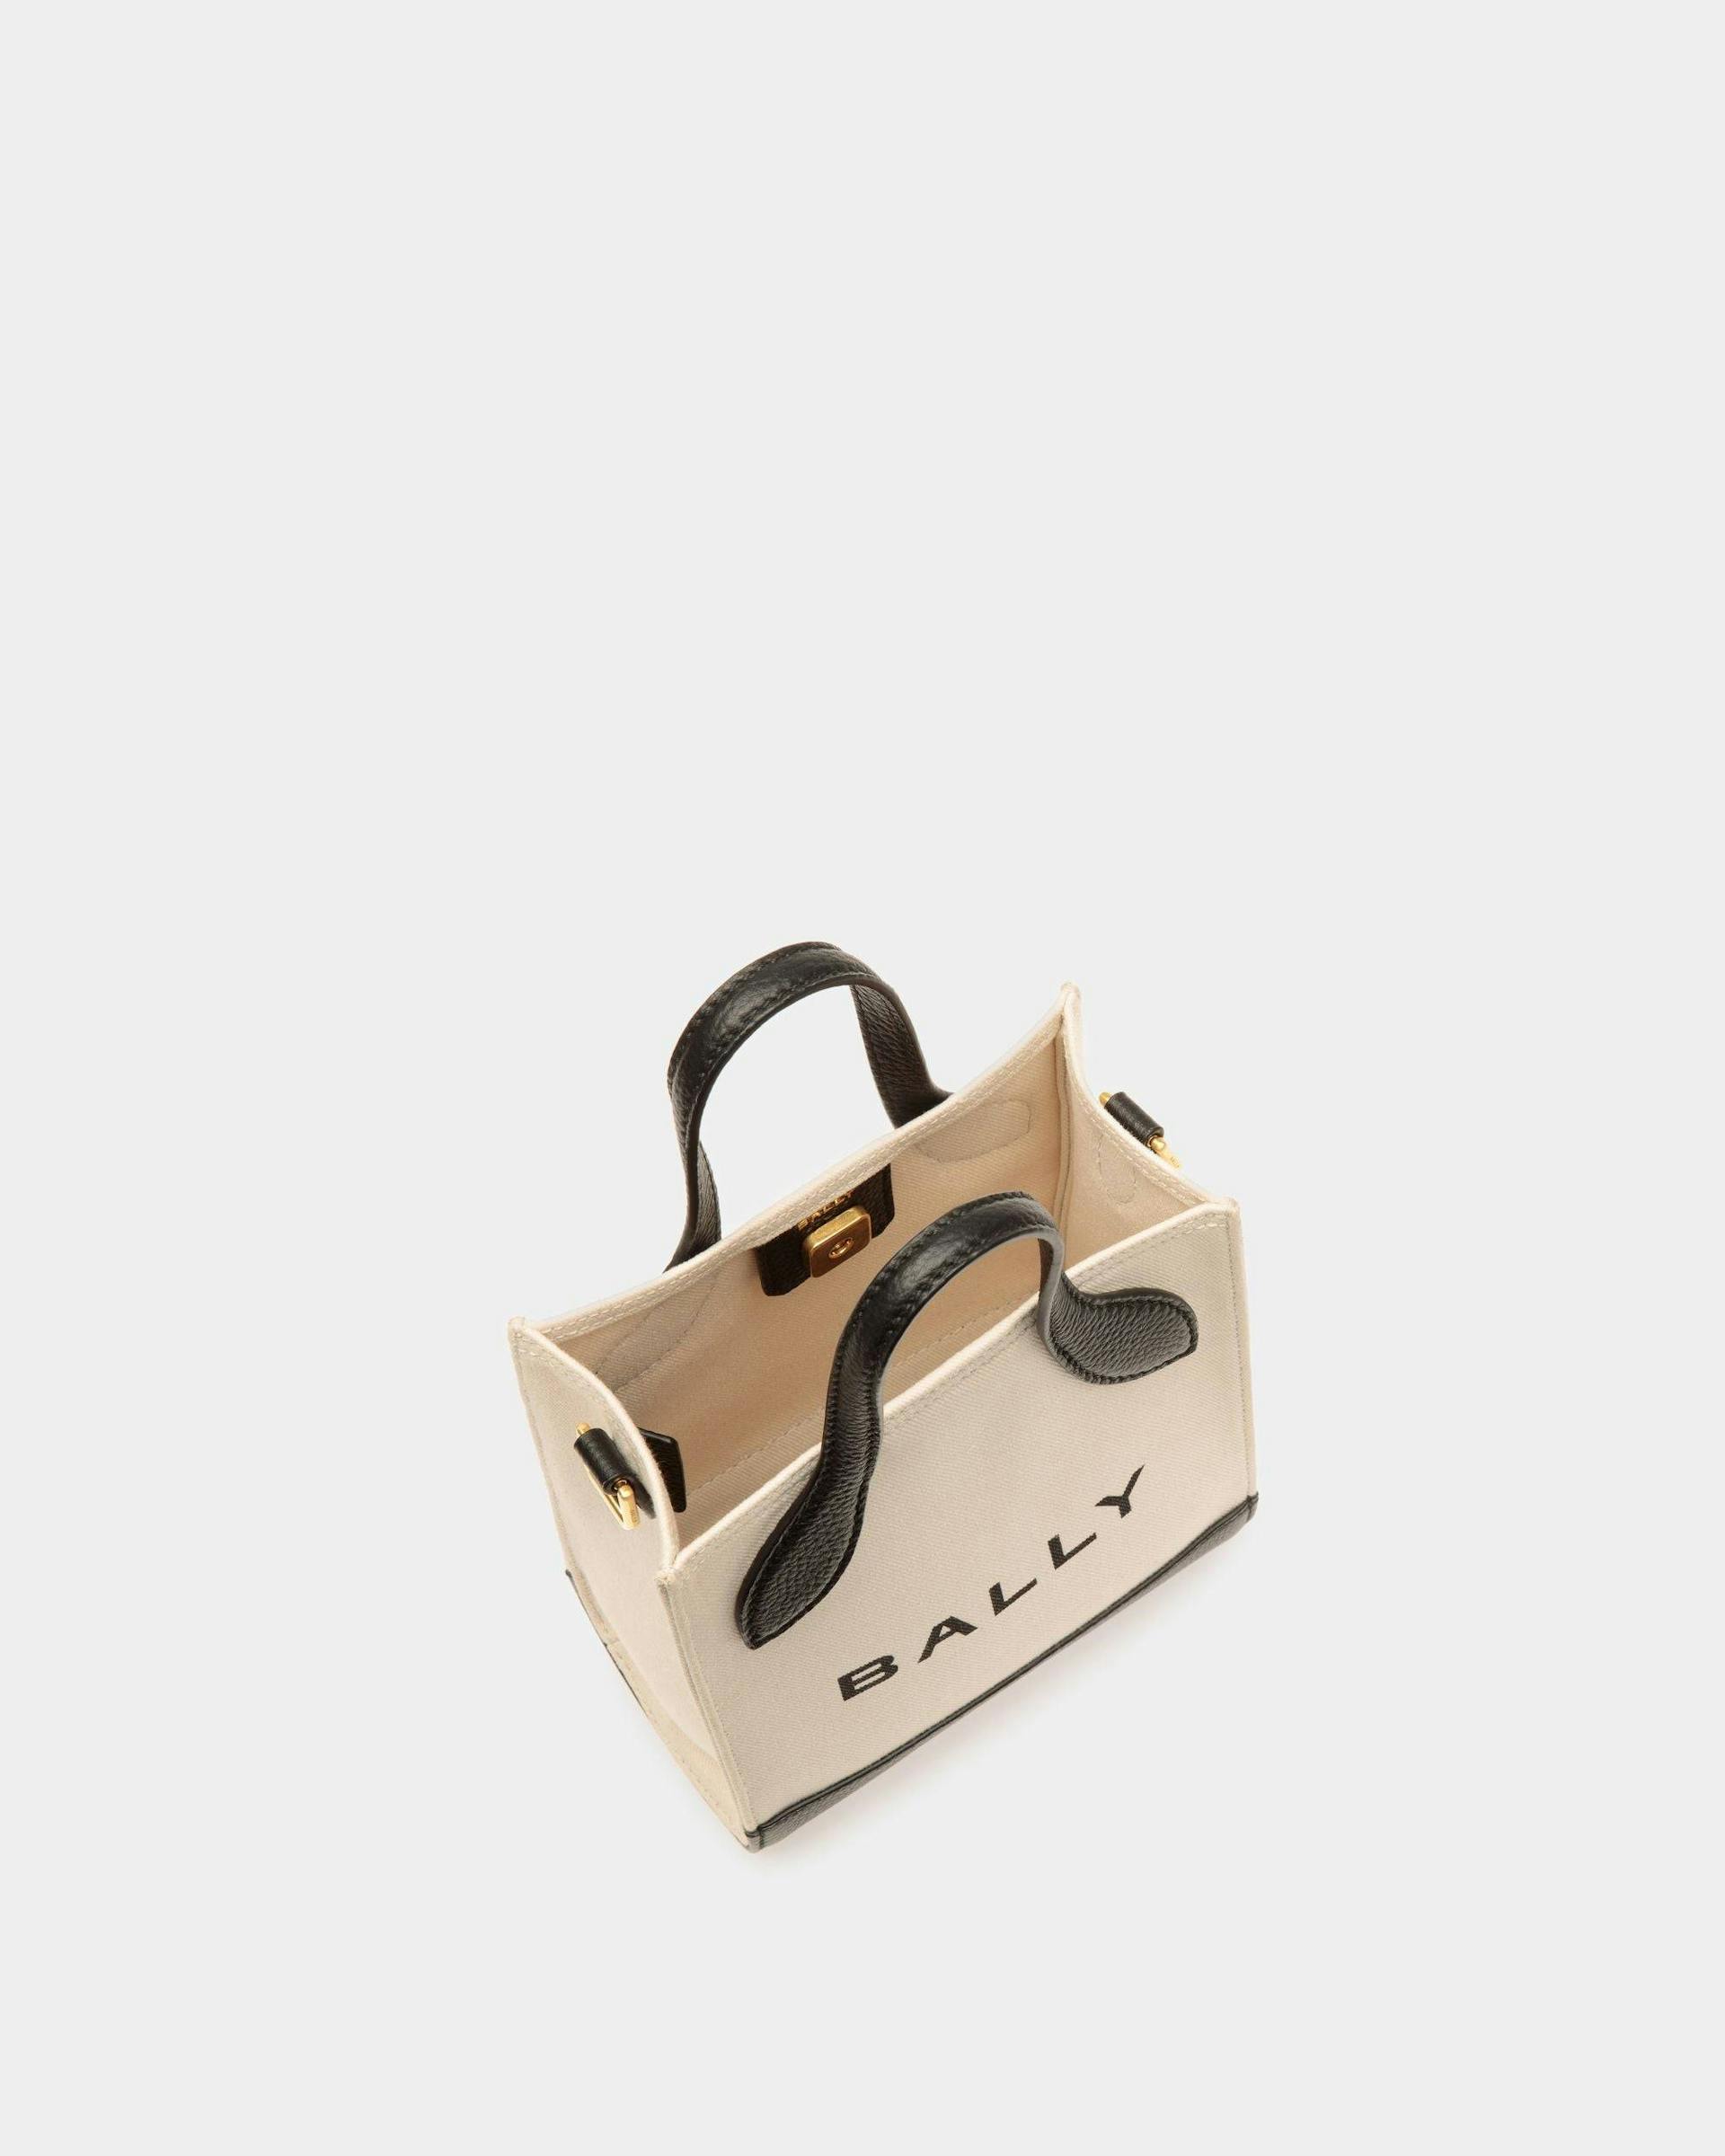 Women's Bar Mini Tote Bag in Neutral And Black Canvas And Leather | Bally | Still Life Open / Inside